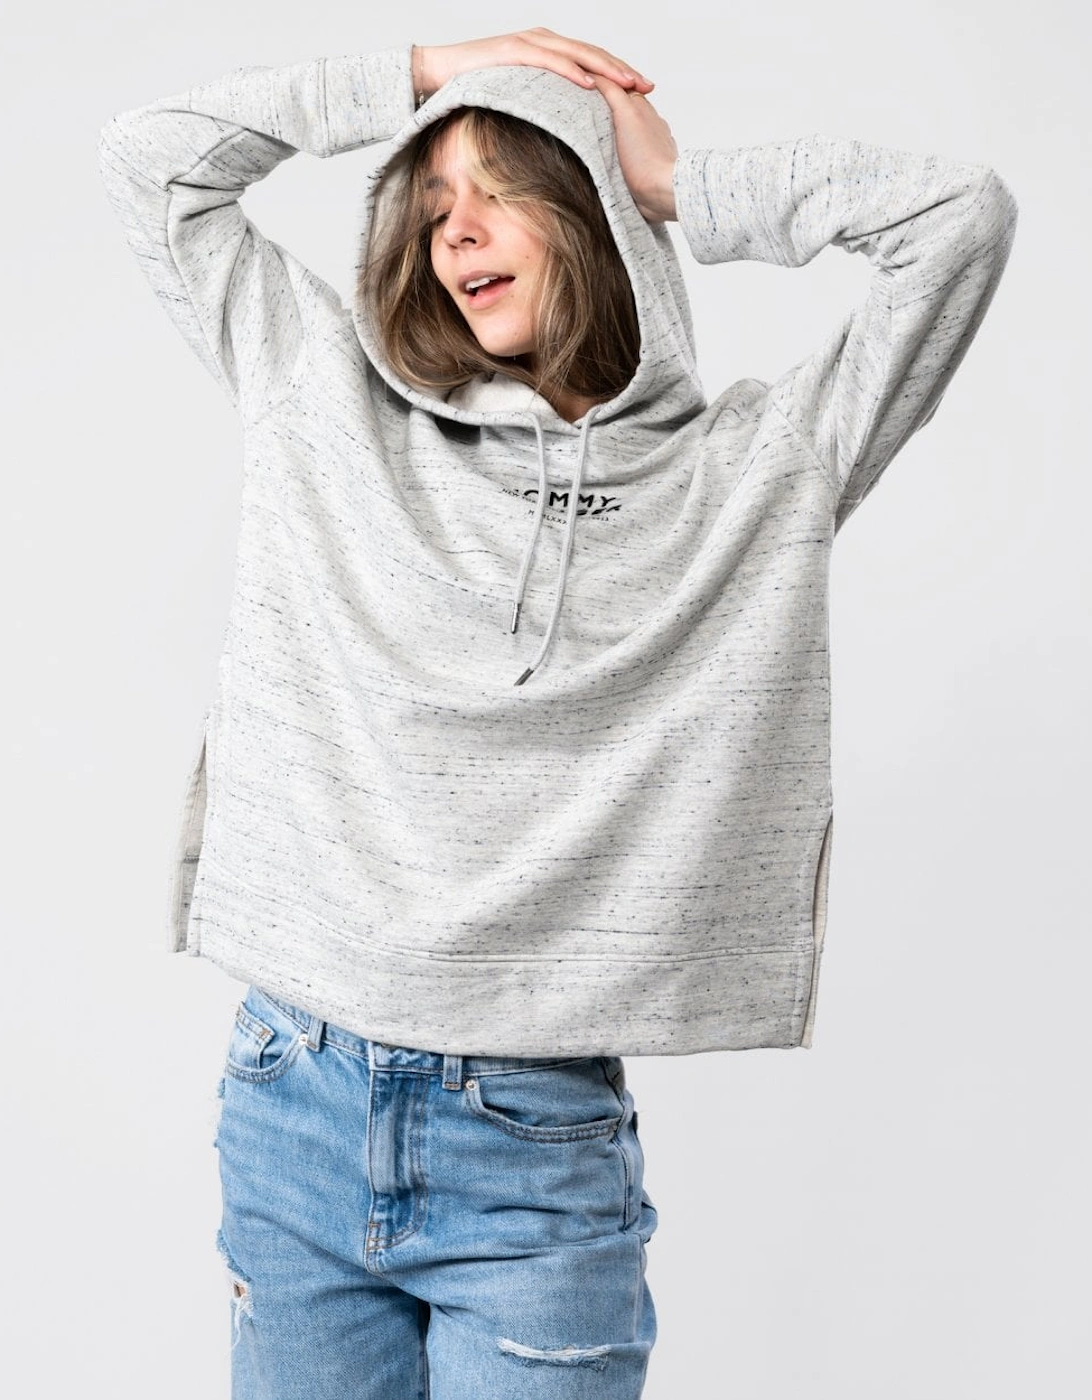 Relaxed Text Flock Print Womens Hoodie